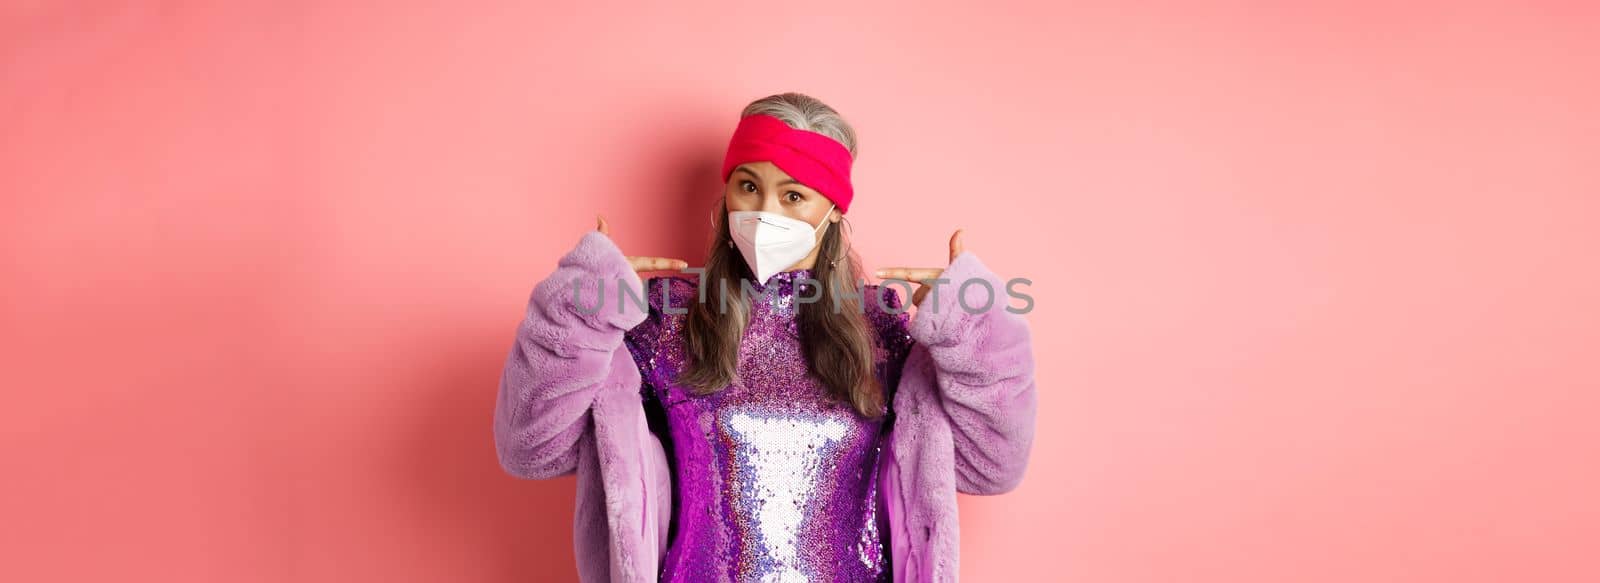 Covid-19, pandemic and fashion concept. Fashionable asian grandmother wearing glittering party dress and respirator, pointing at mask, pink background.